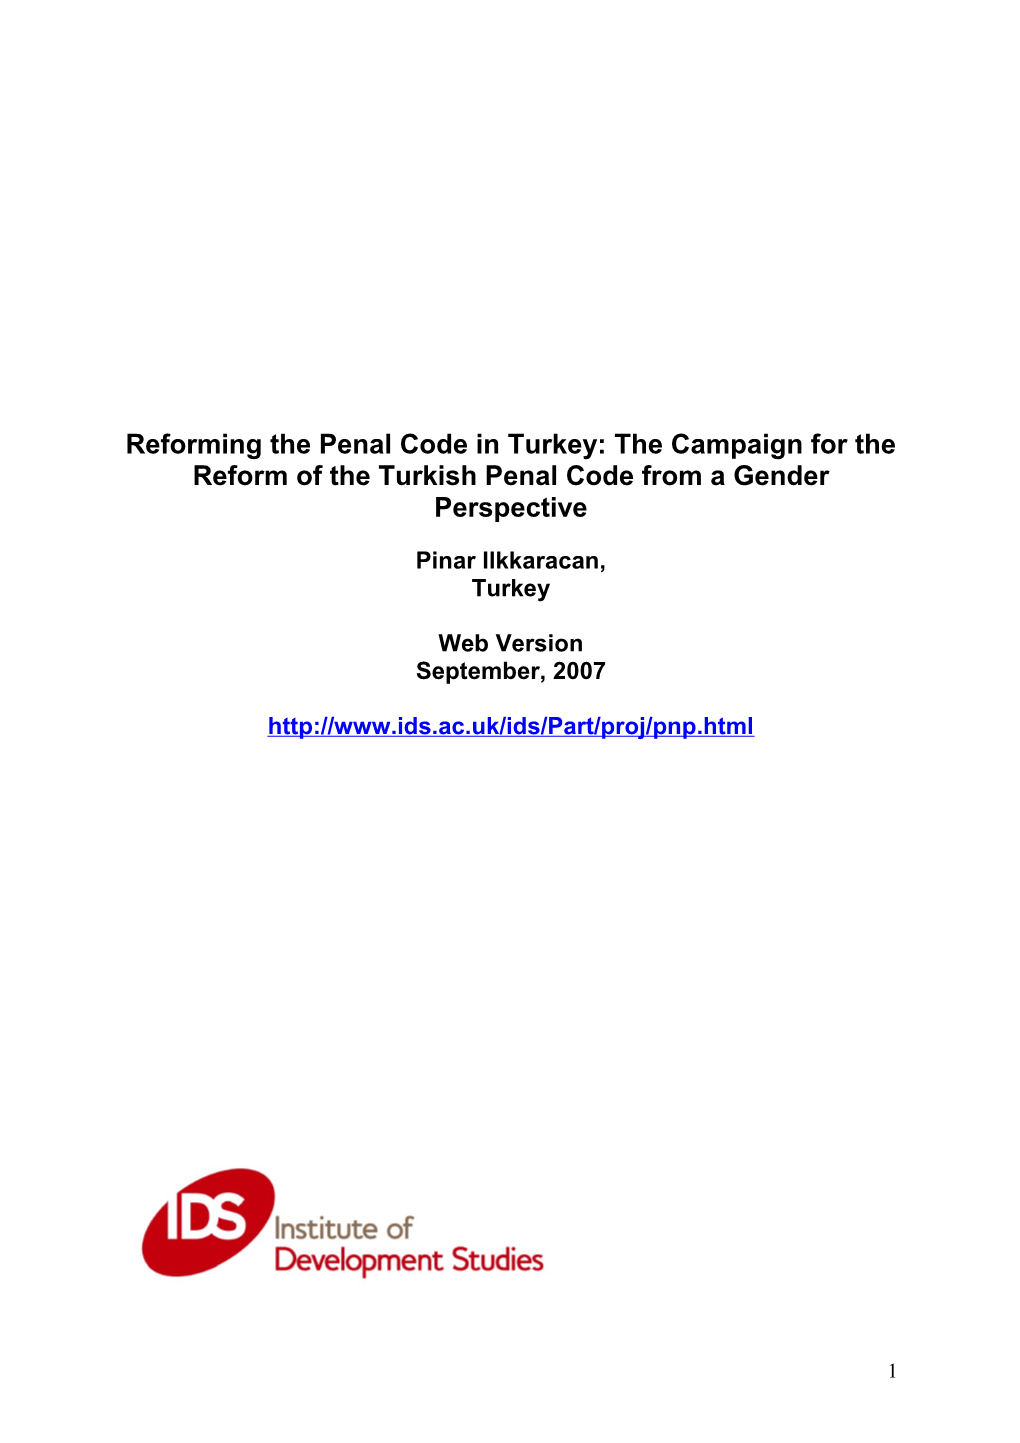 Sexuality and the Reform of the Penal Code in Turkey